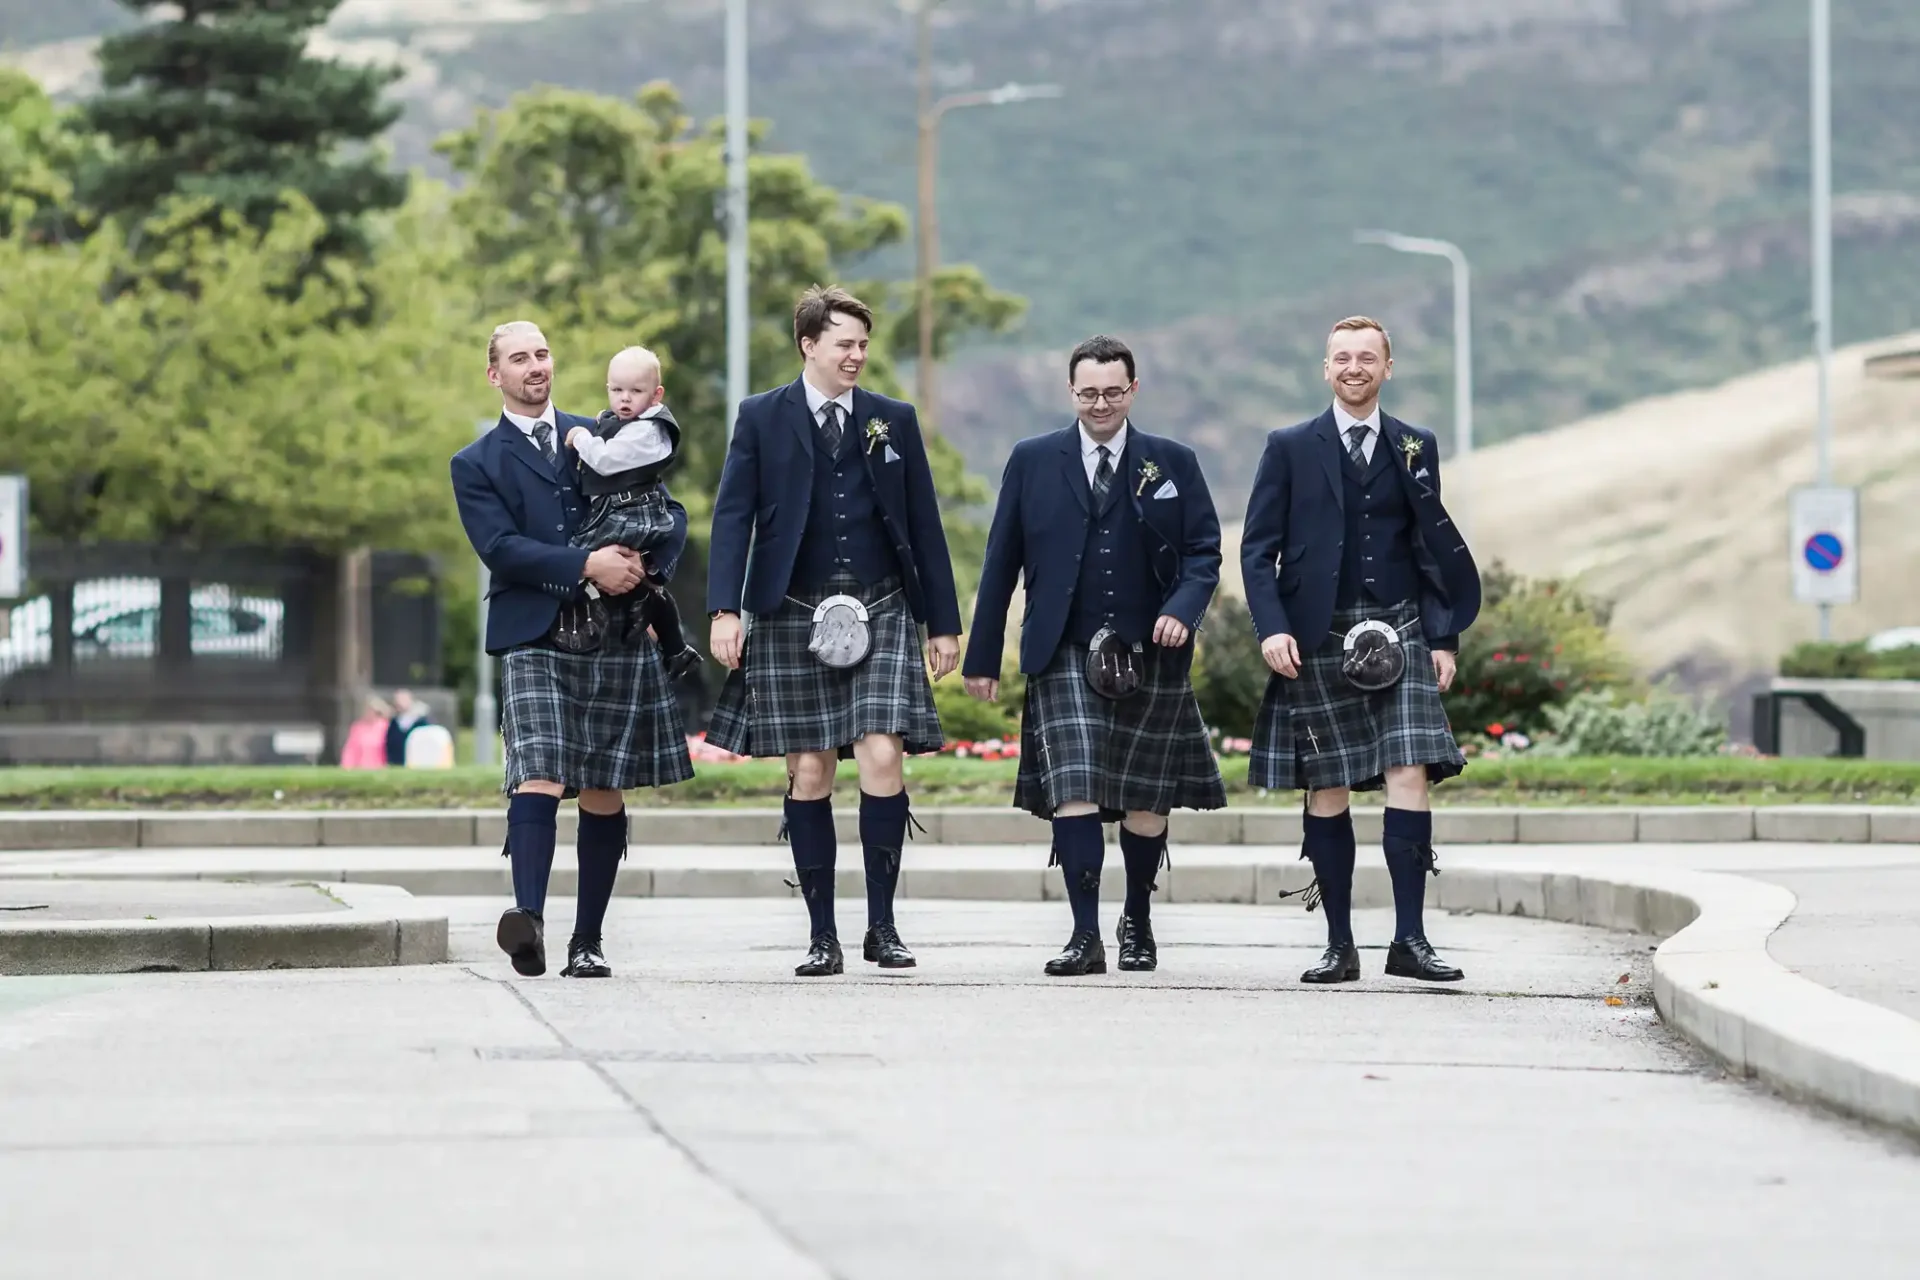 Five men in traditional scottish attire, including kilts, walking together in a city setting, with one holding a young child.